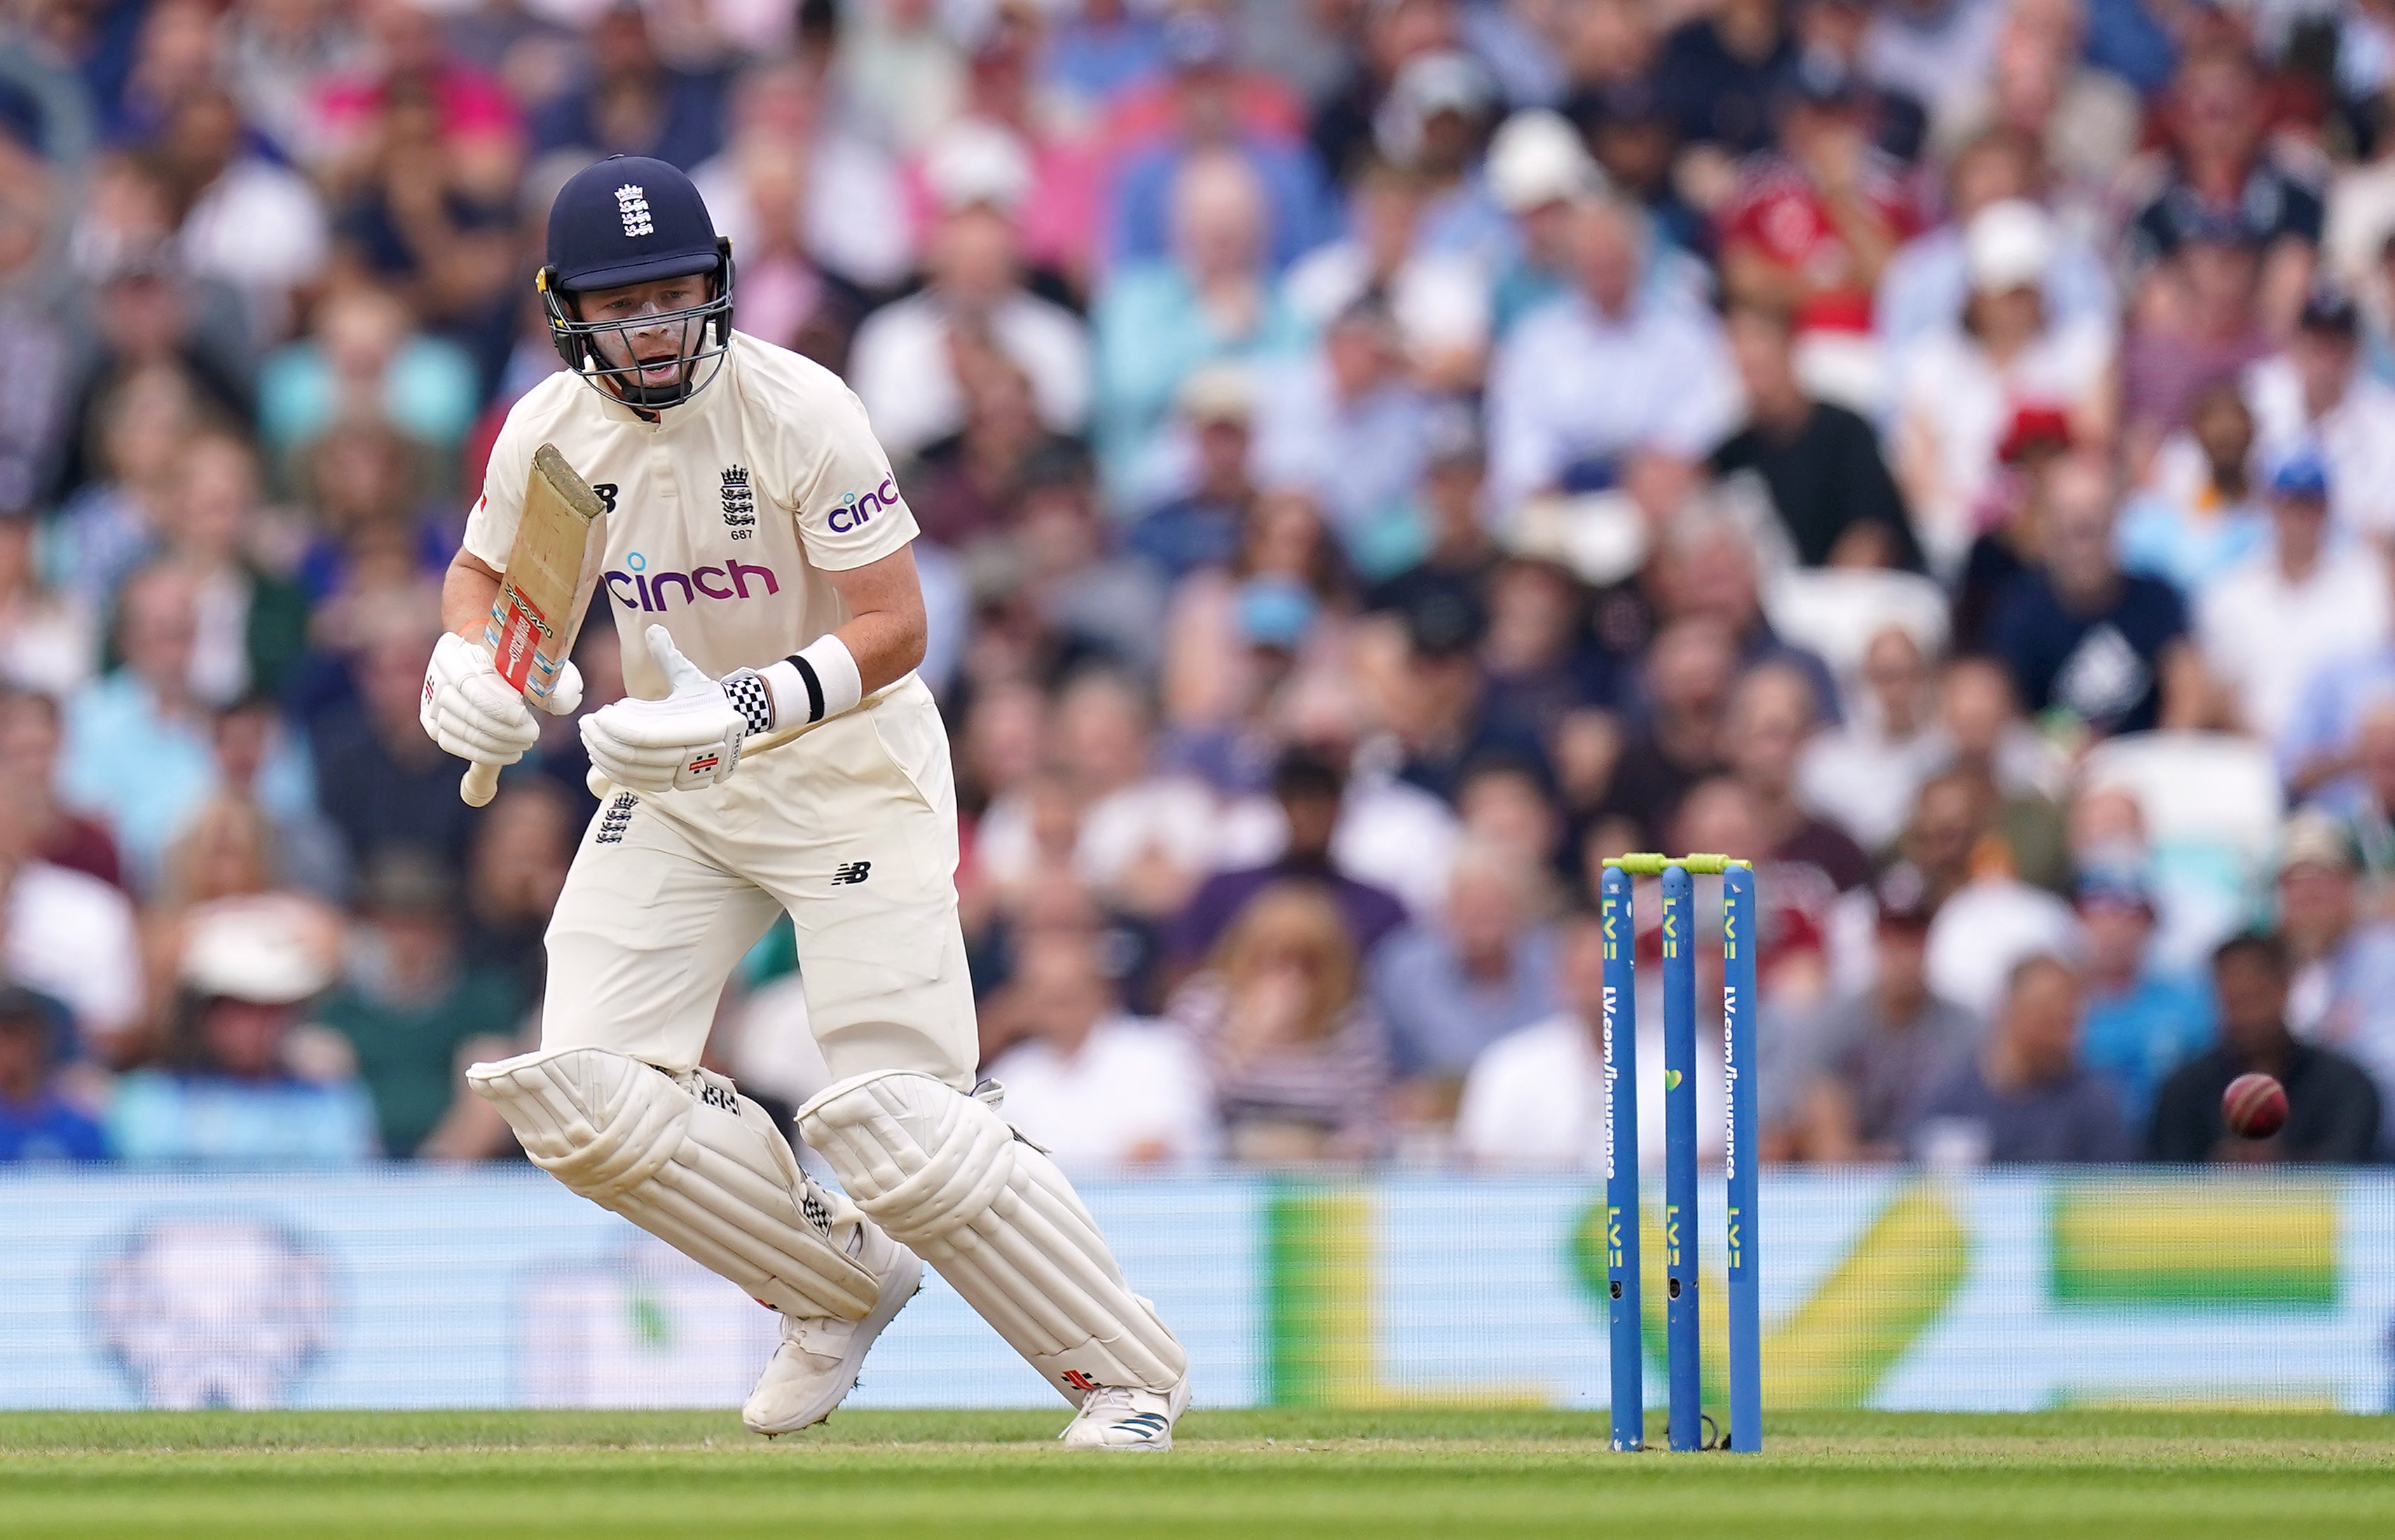 Ollie Pope started England’s fightback (Adam Davy/PA)